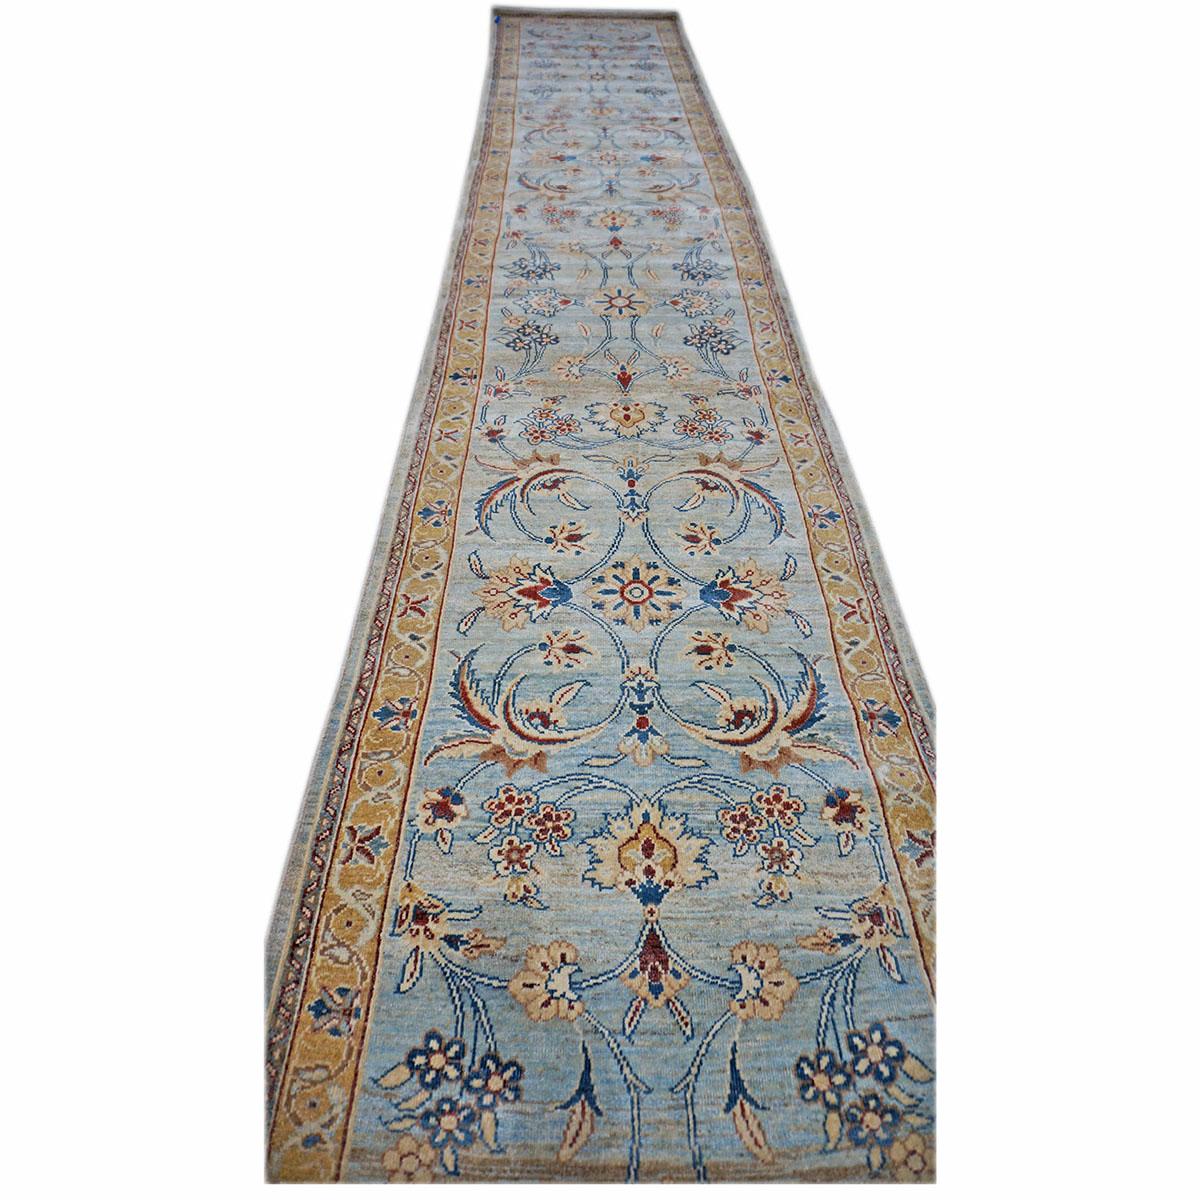 Ashly Fine Rugs presents an antique recreation of an original Persian Sultanabad hall runner. Part of our own previous production, this antique recreation was thought of and created in-house and 100% handmade in Persia by master weavers. Sultanabads